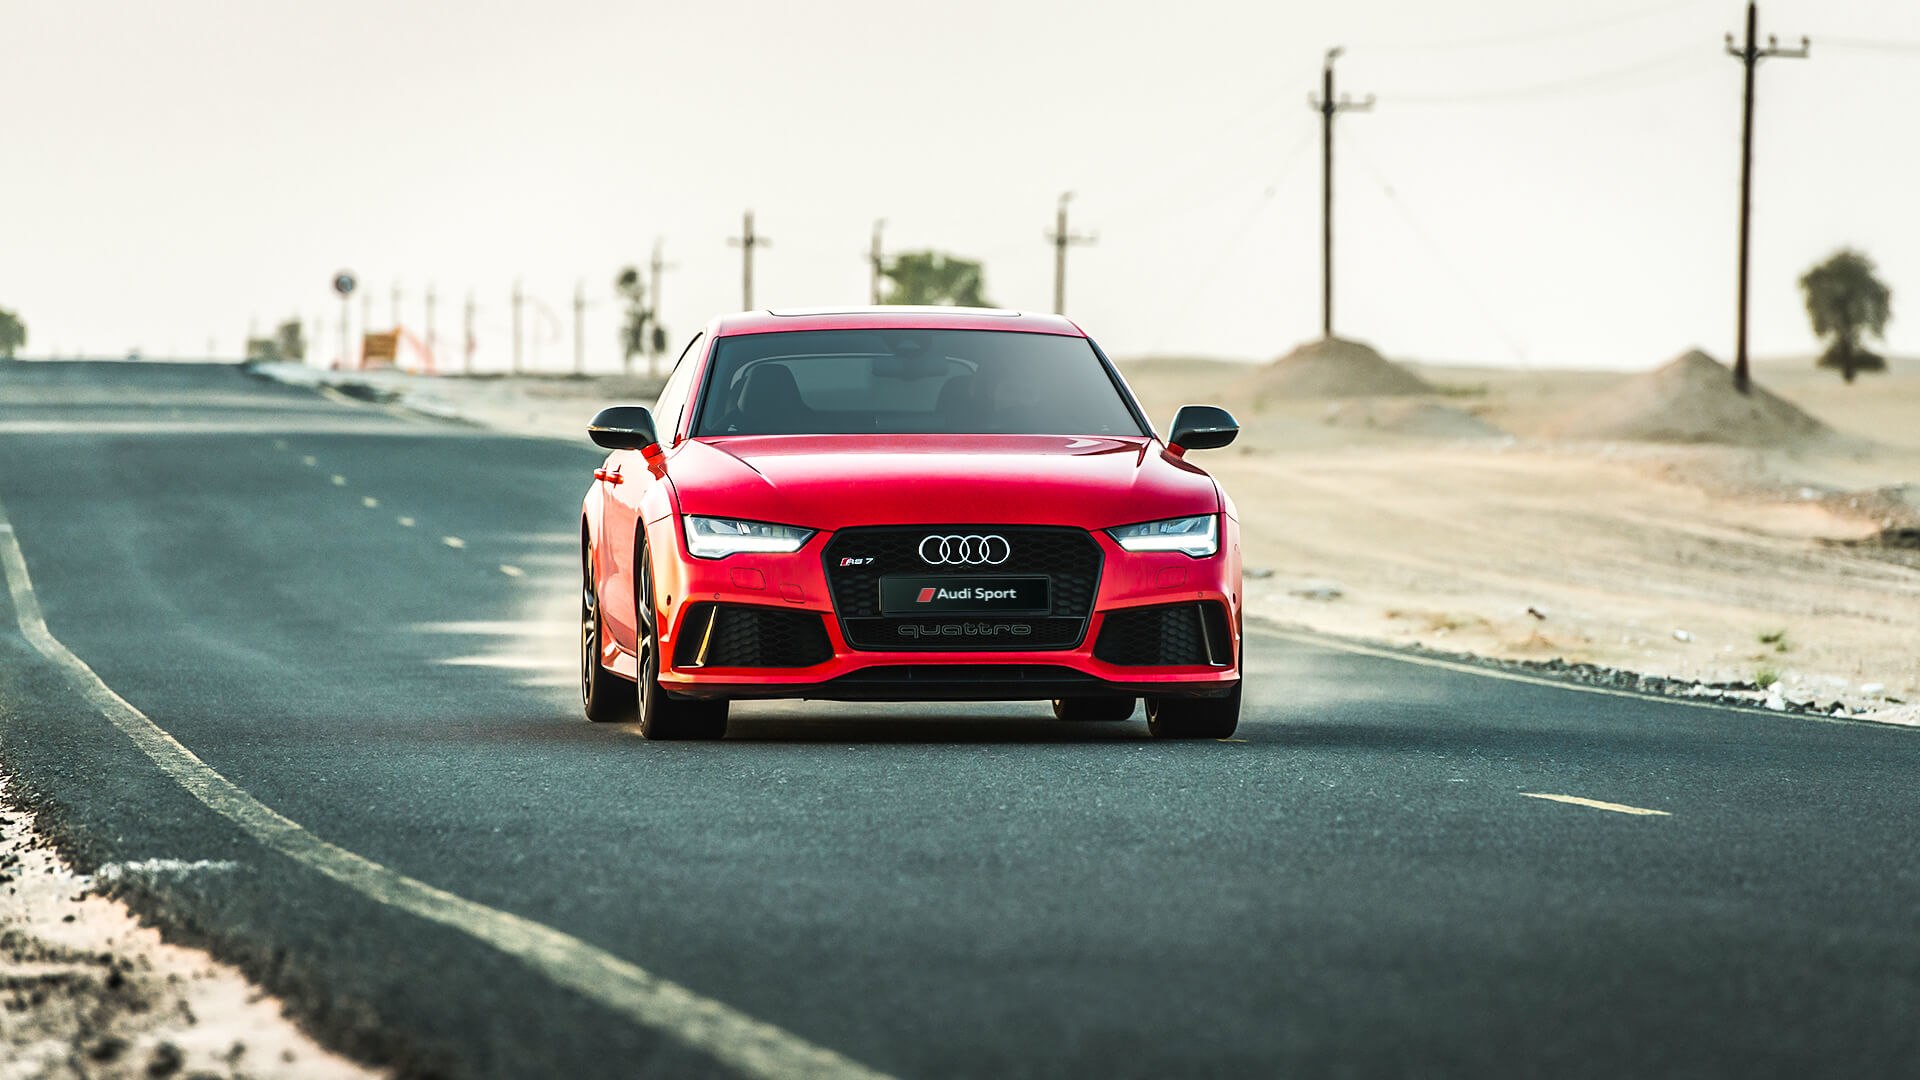 Performance Attributes of the 2018 Audi RS 7